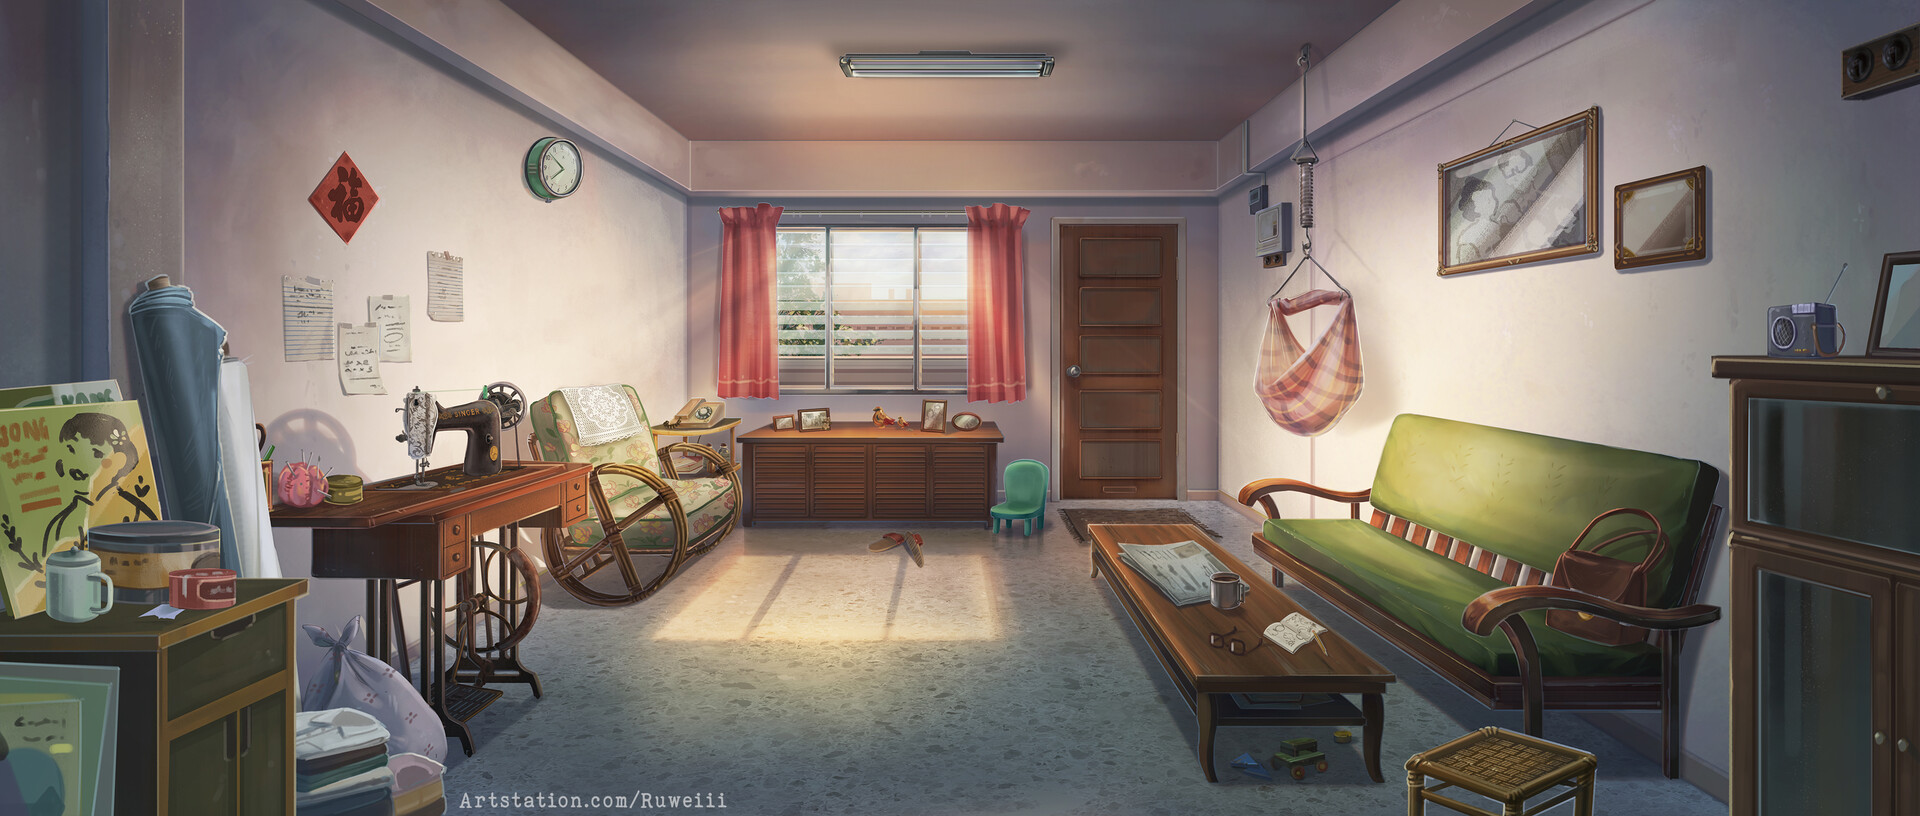 Premium Photo  Interior of room in style of abstraction simple design in anime  apartment